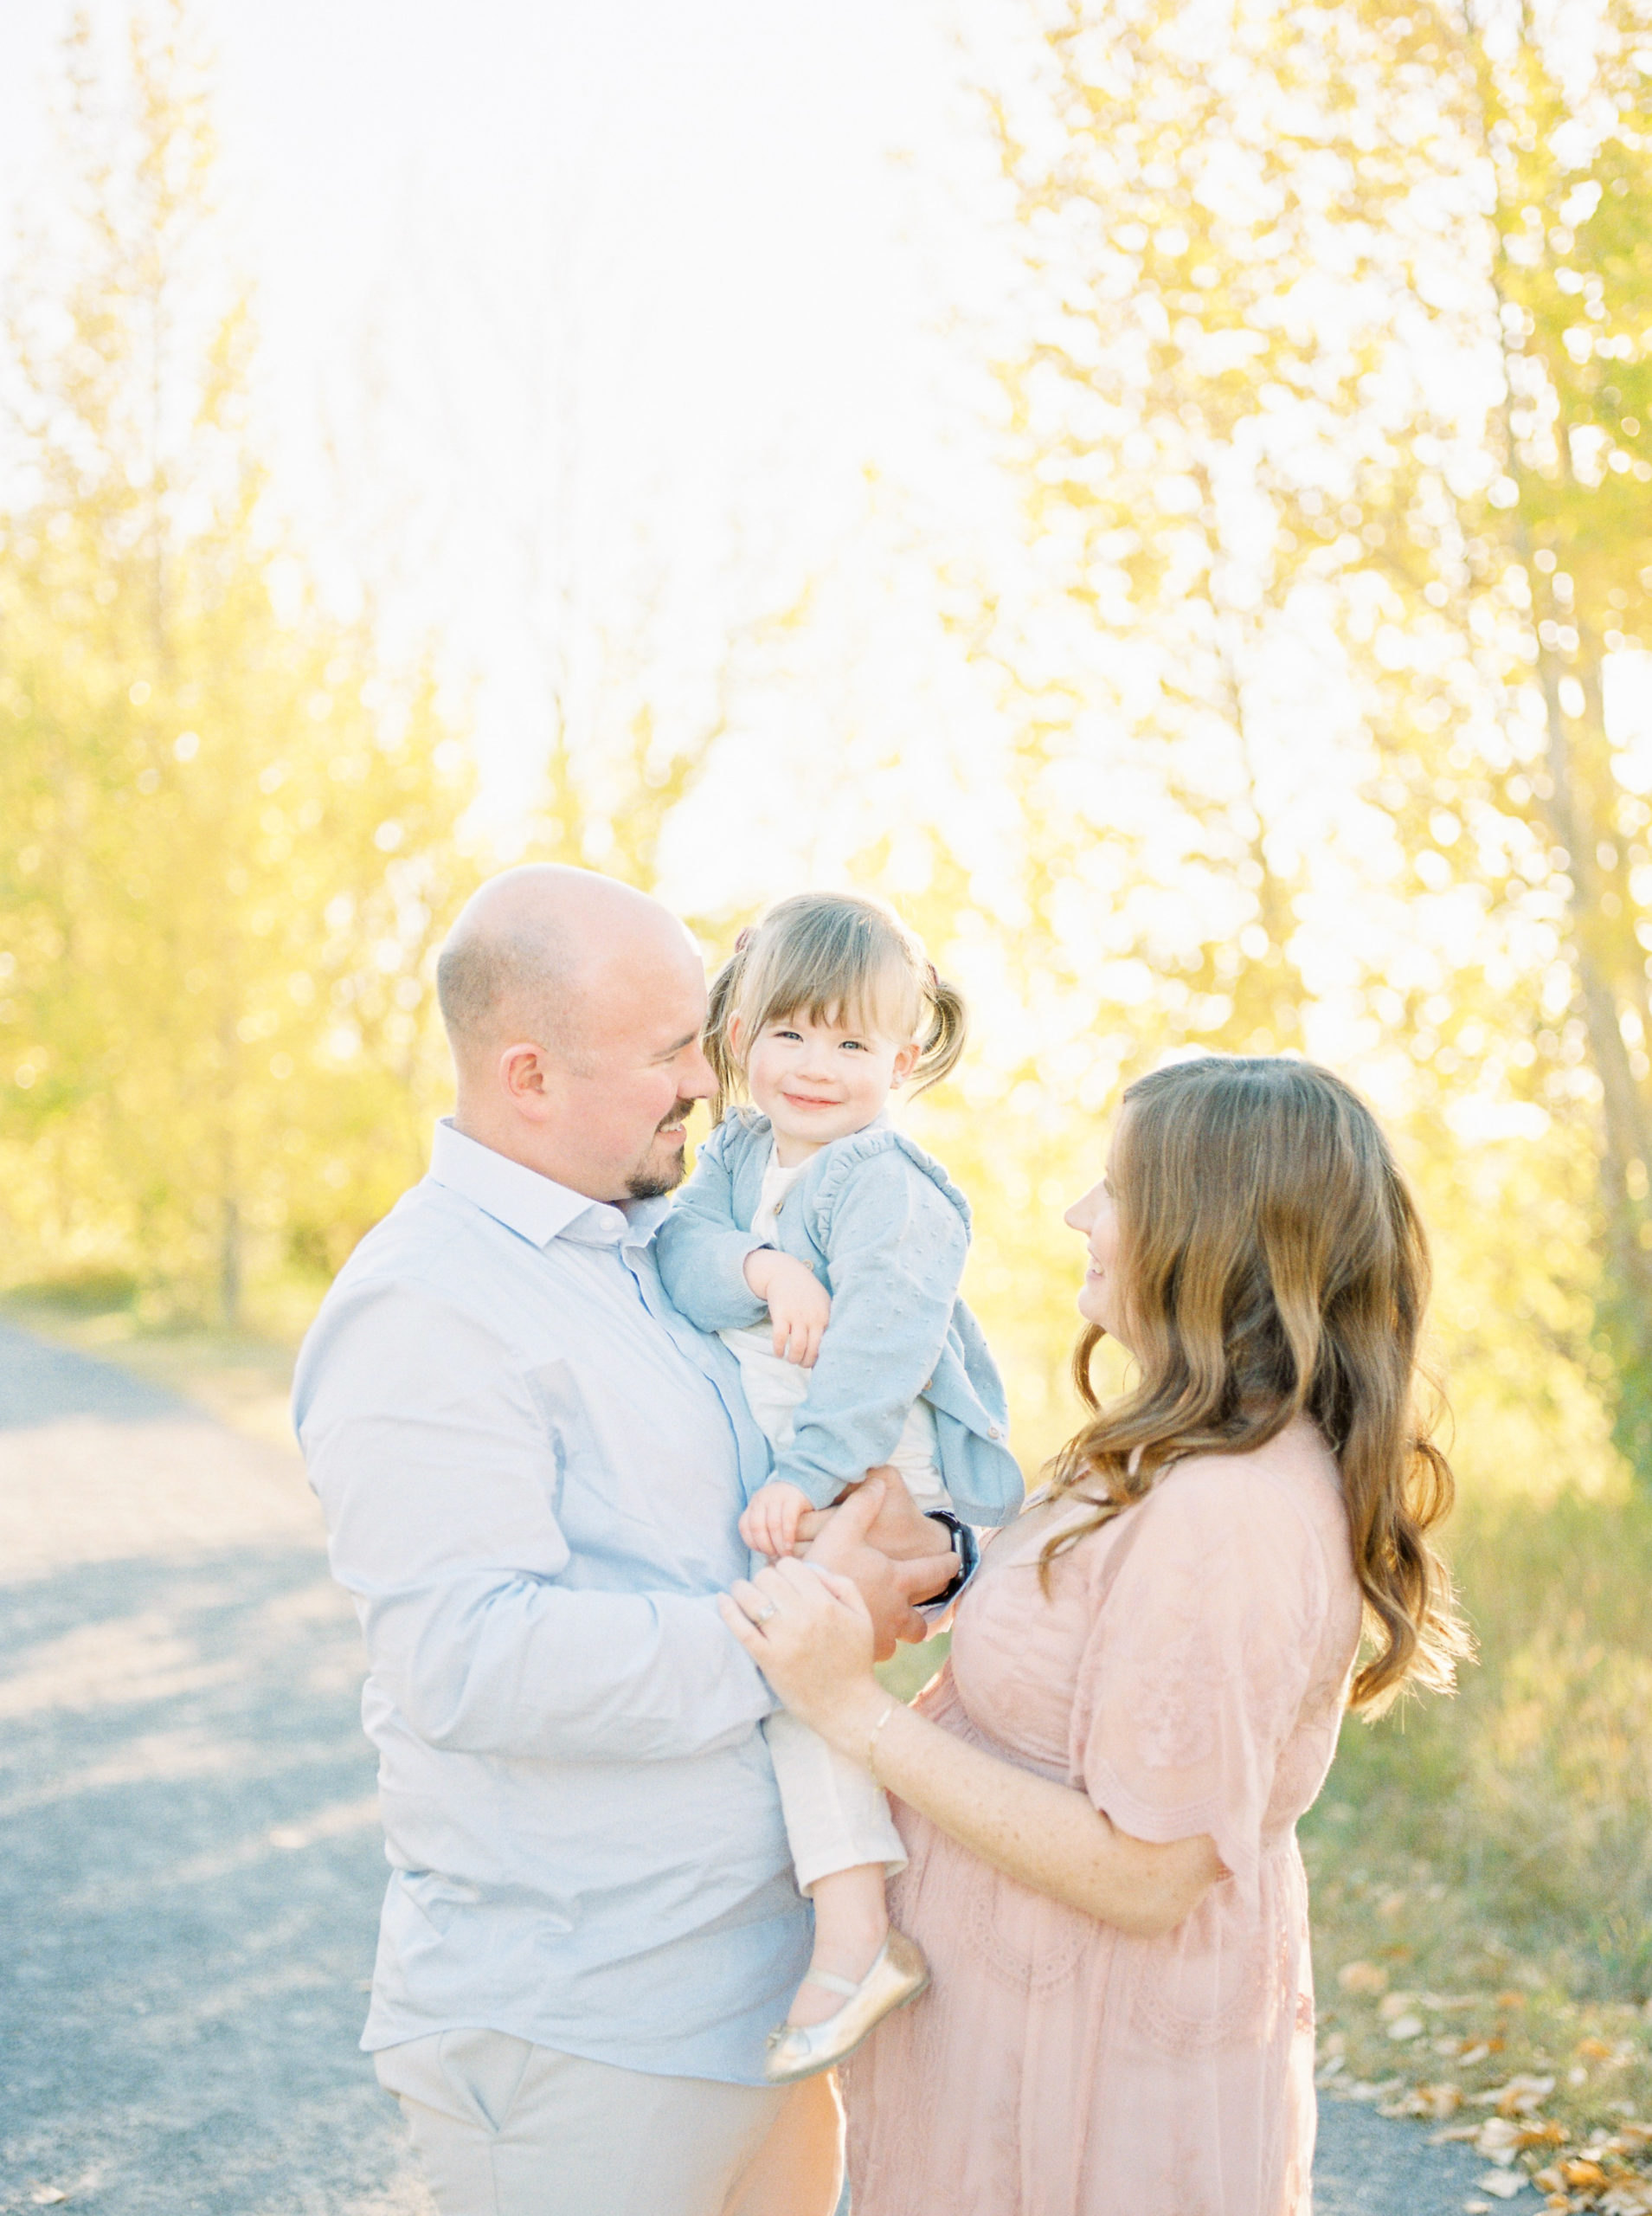 Expectant mom and dad with smiling toddler in fall photography edmonton session